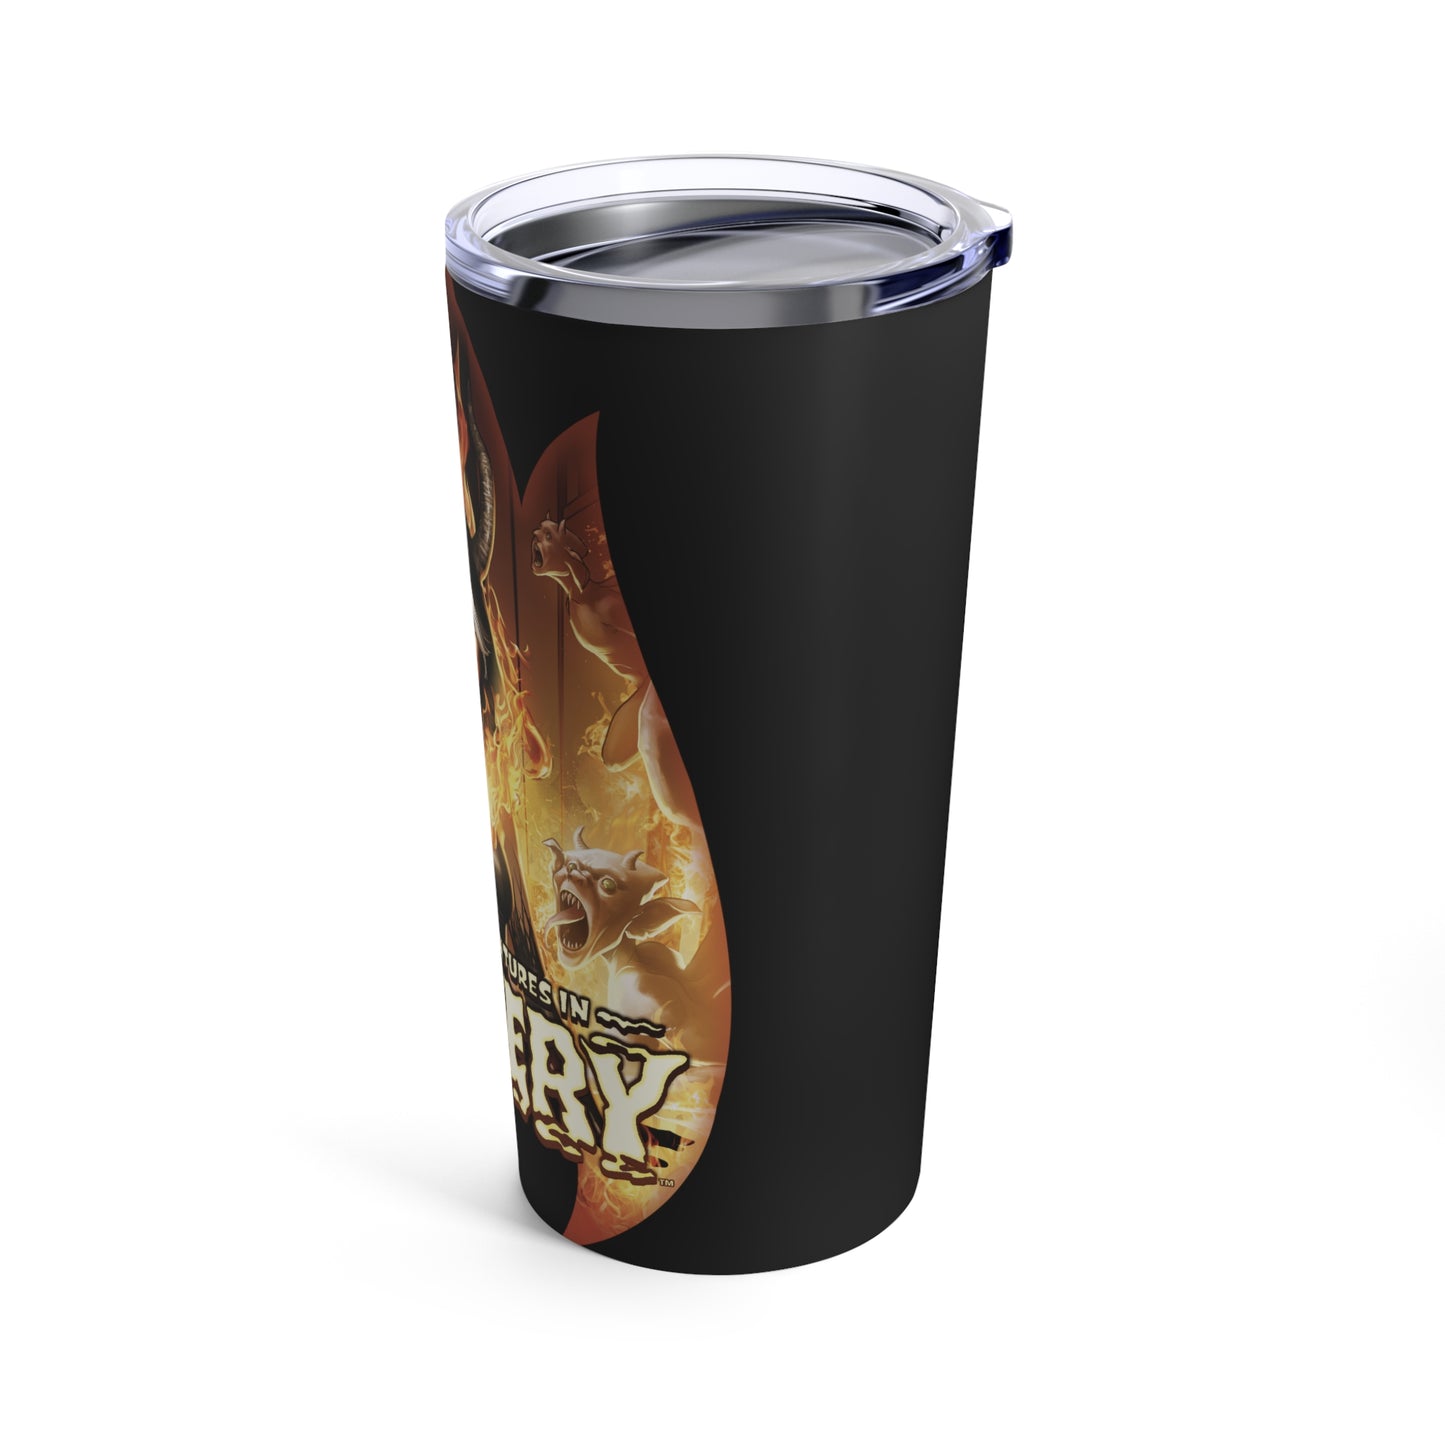 Chilling Adventures in Sorcery Stainless Steal Tumbler 20oz Featuring Madam Satan